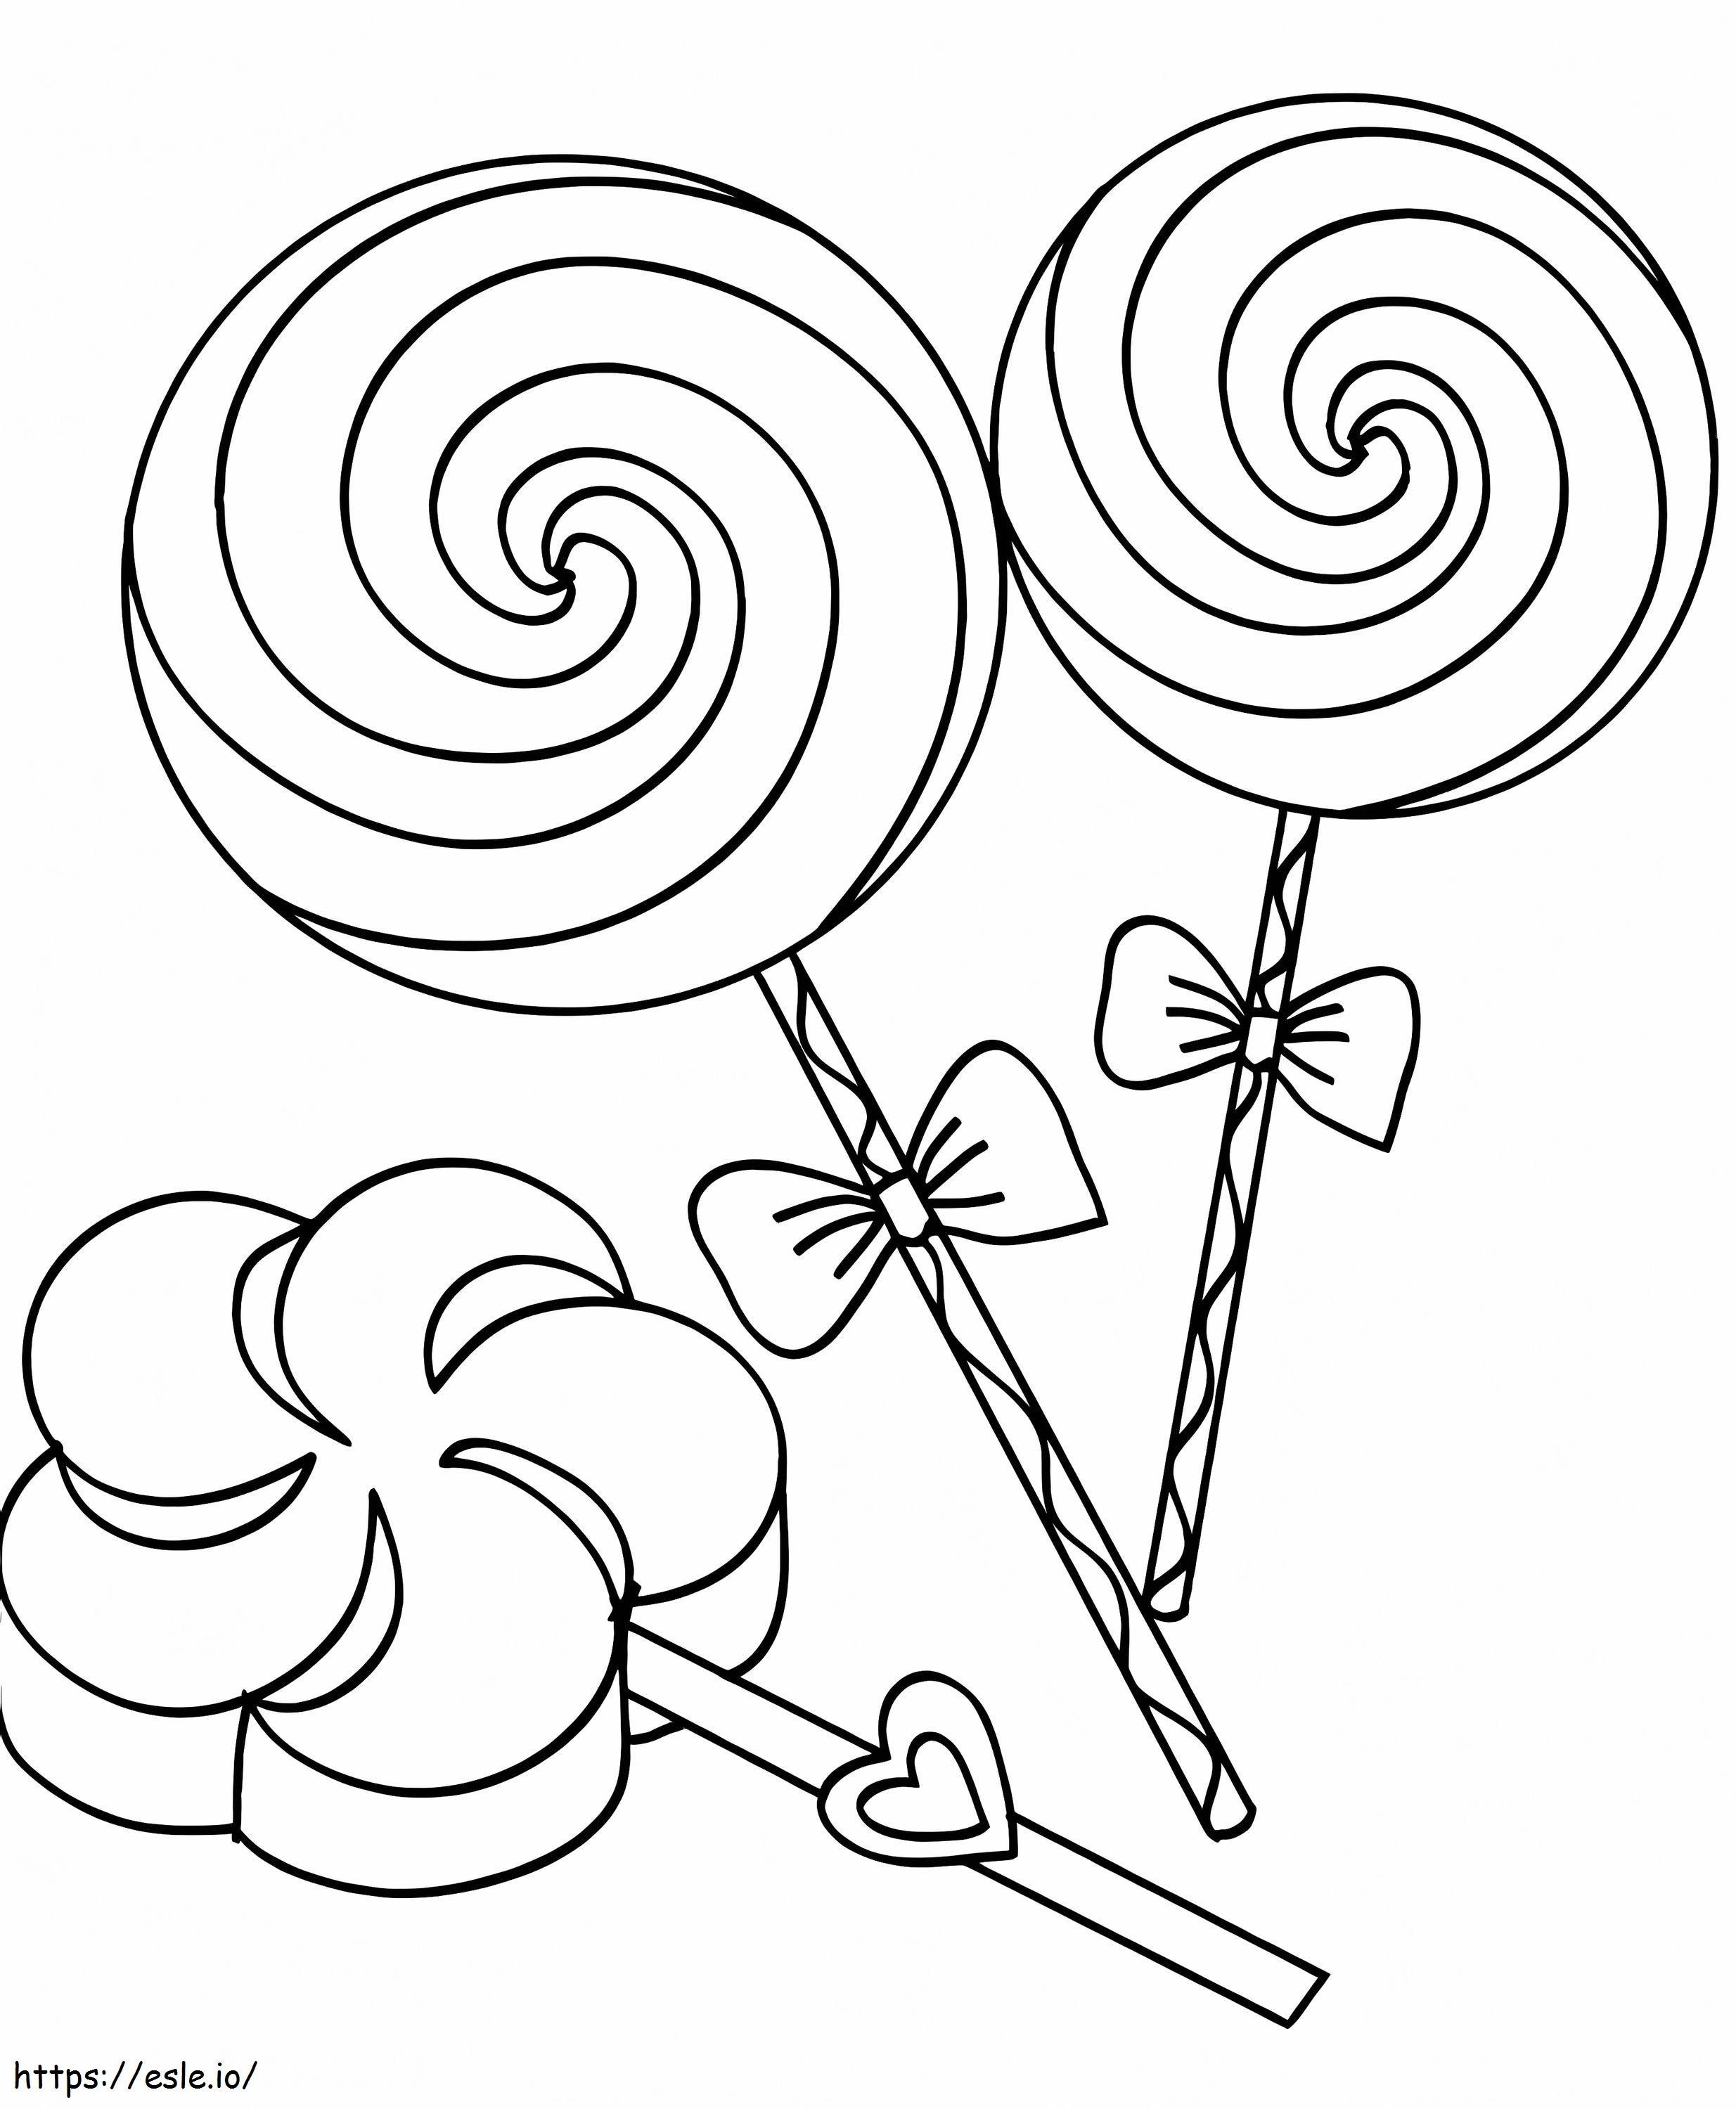 Three Candies coloring page